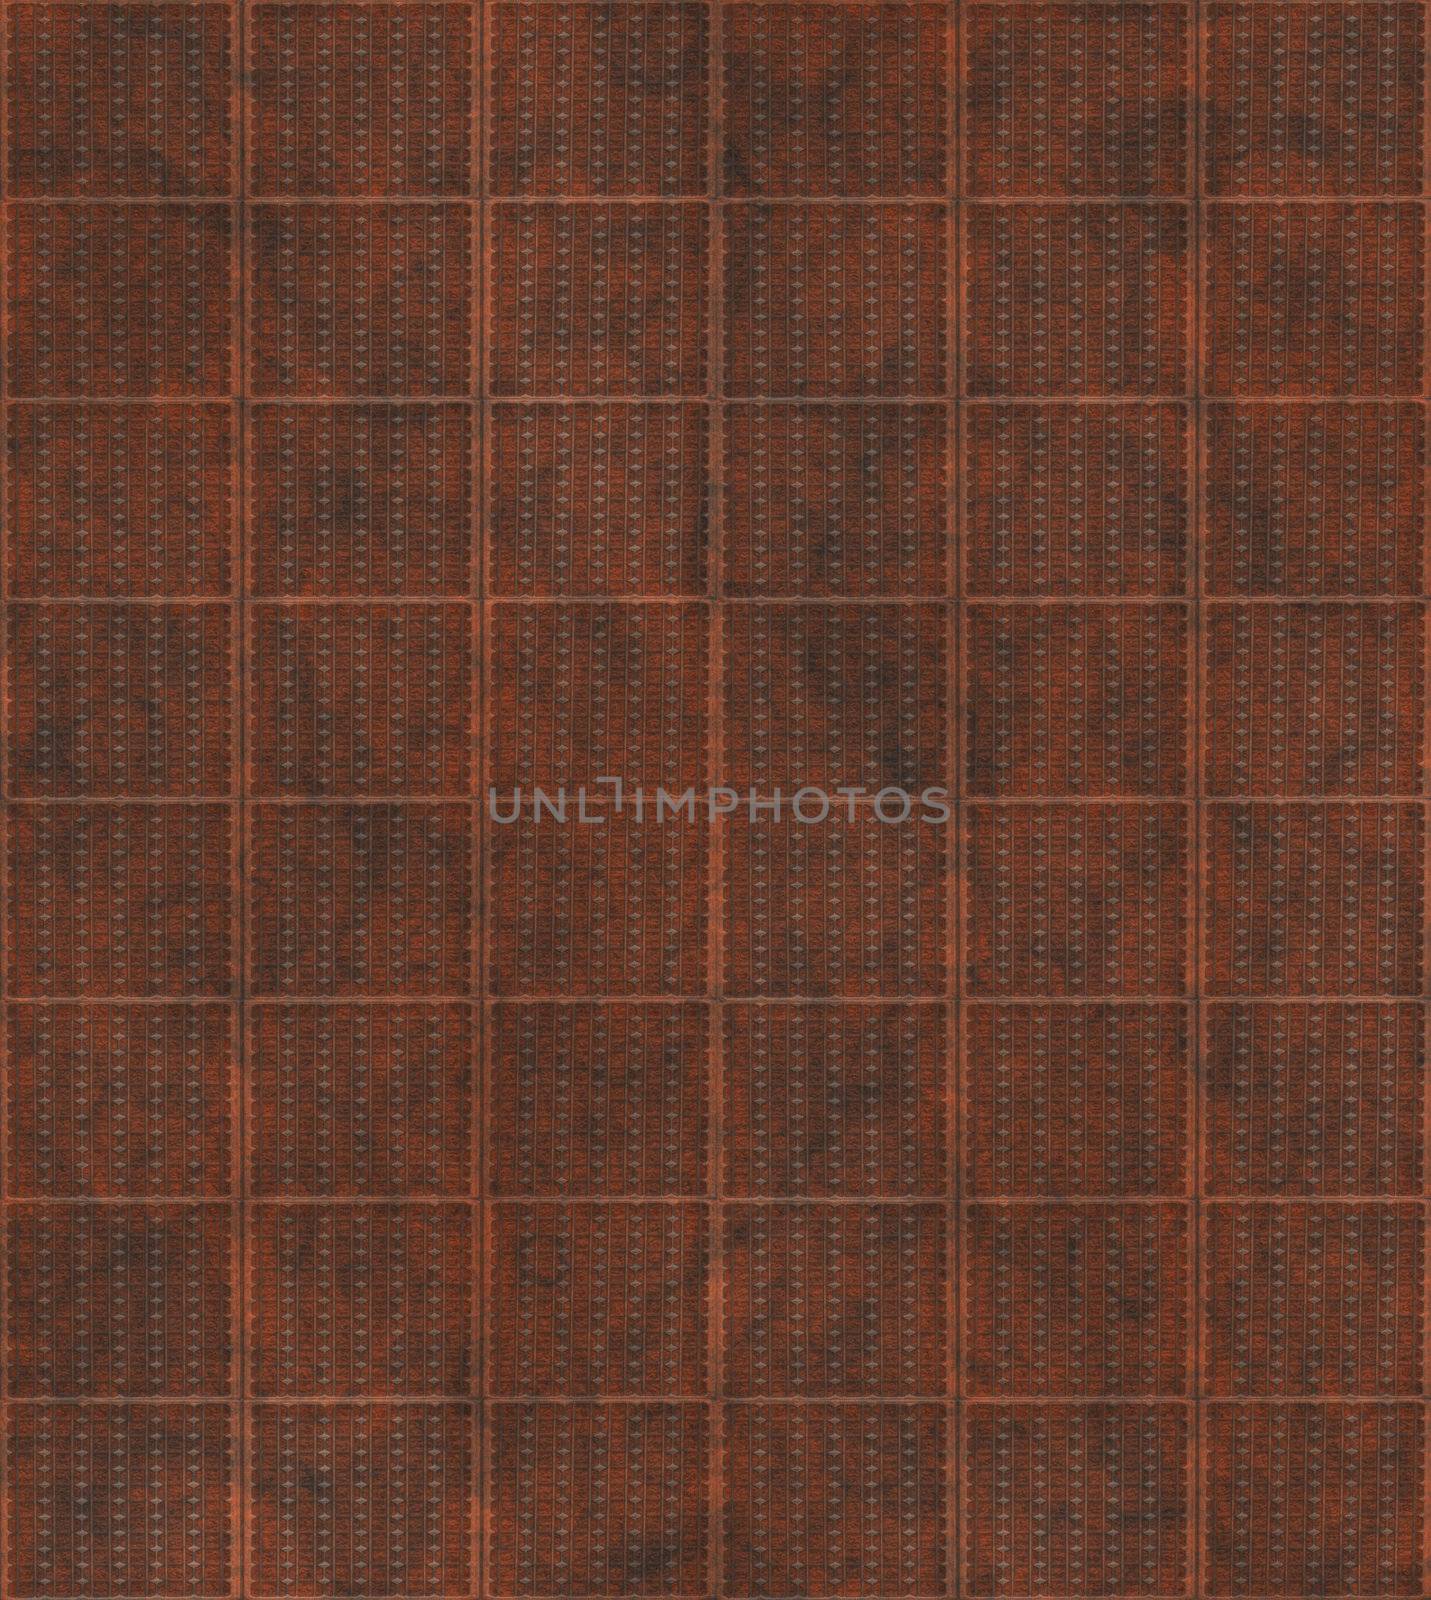 A photography of a rusty plate texture